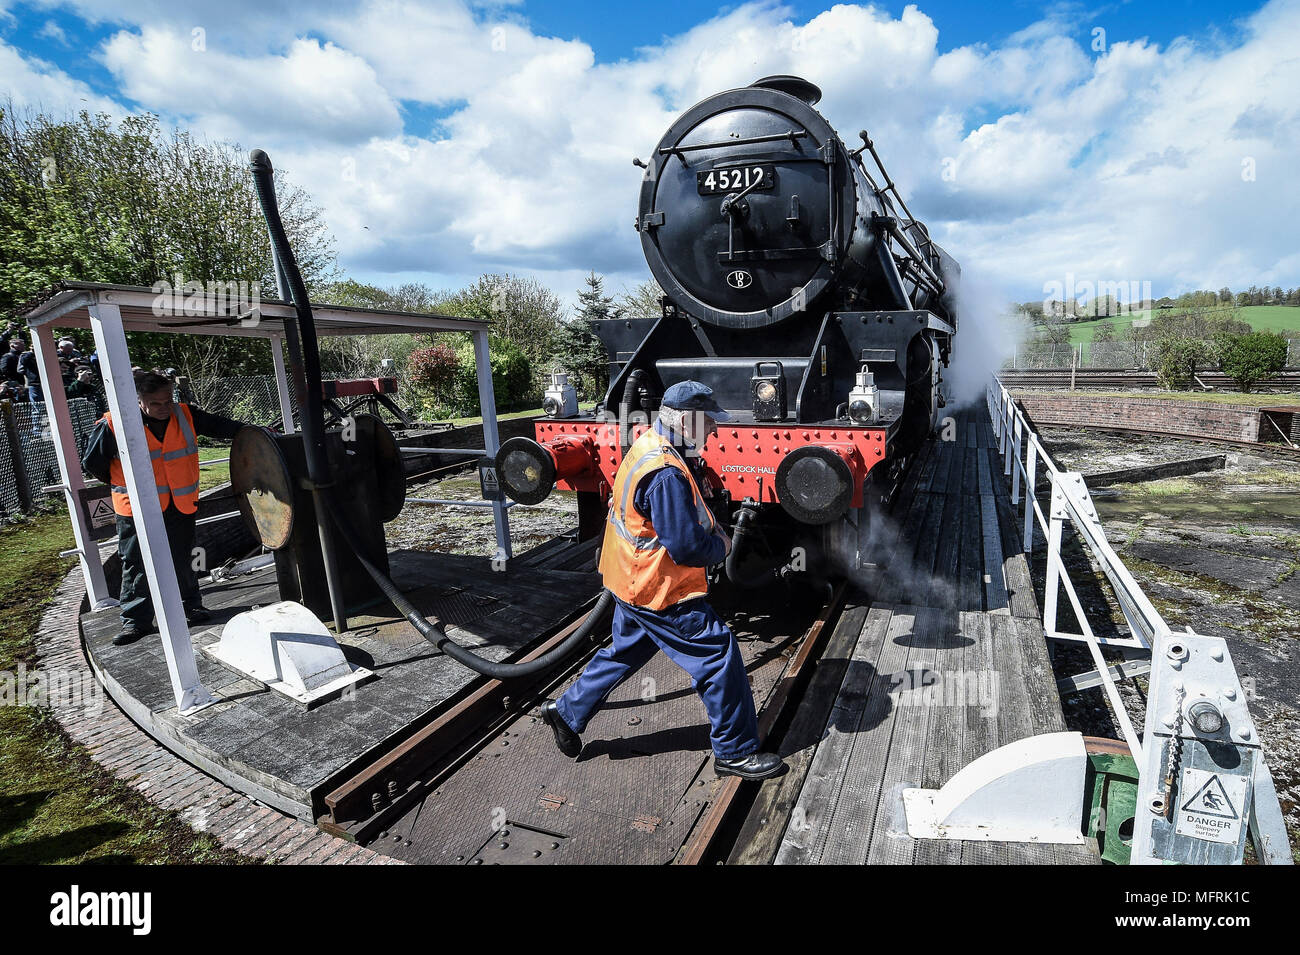 Steam Locomotive 45212 ROY 'CORKY' BROWN Stanier Black Five, Class 5MT 4-6-0, is turned around on a huge turntable at Yeovil Junction, where it pulled in during its leg of the Great Britain XI steam train tour, from Cardiff to Swanage via Dorchester. Stock Photo